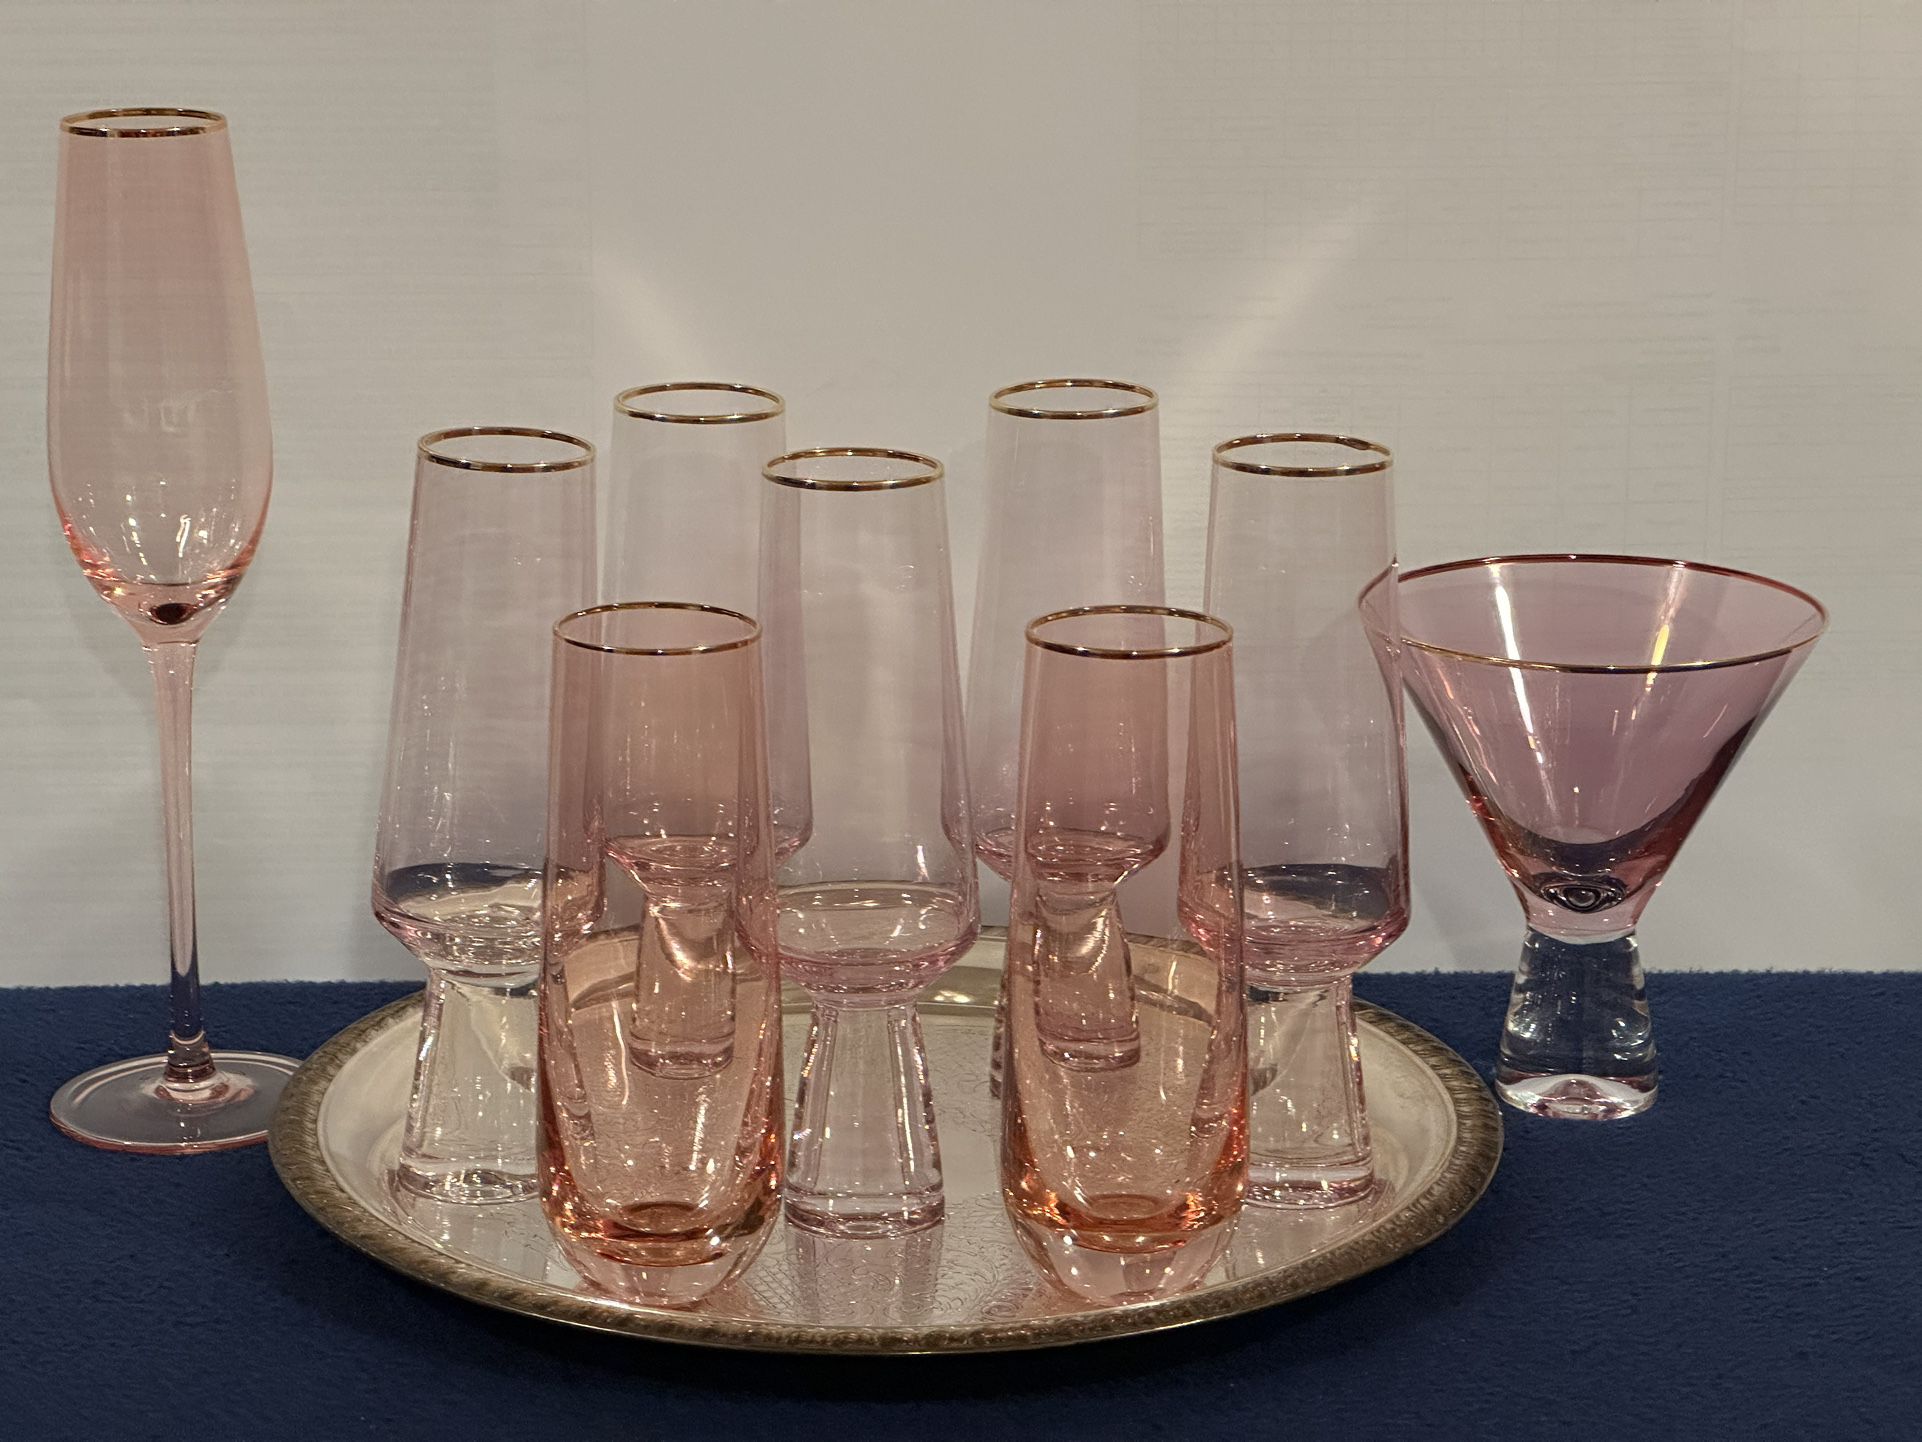 Gorgeous Vintage Pink with Gold Rim Glassware 10 Pieces